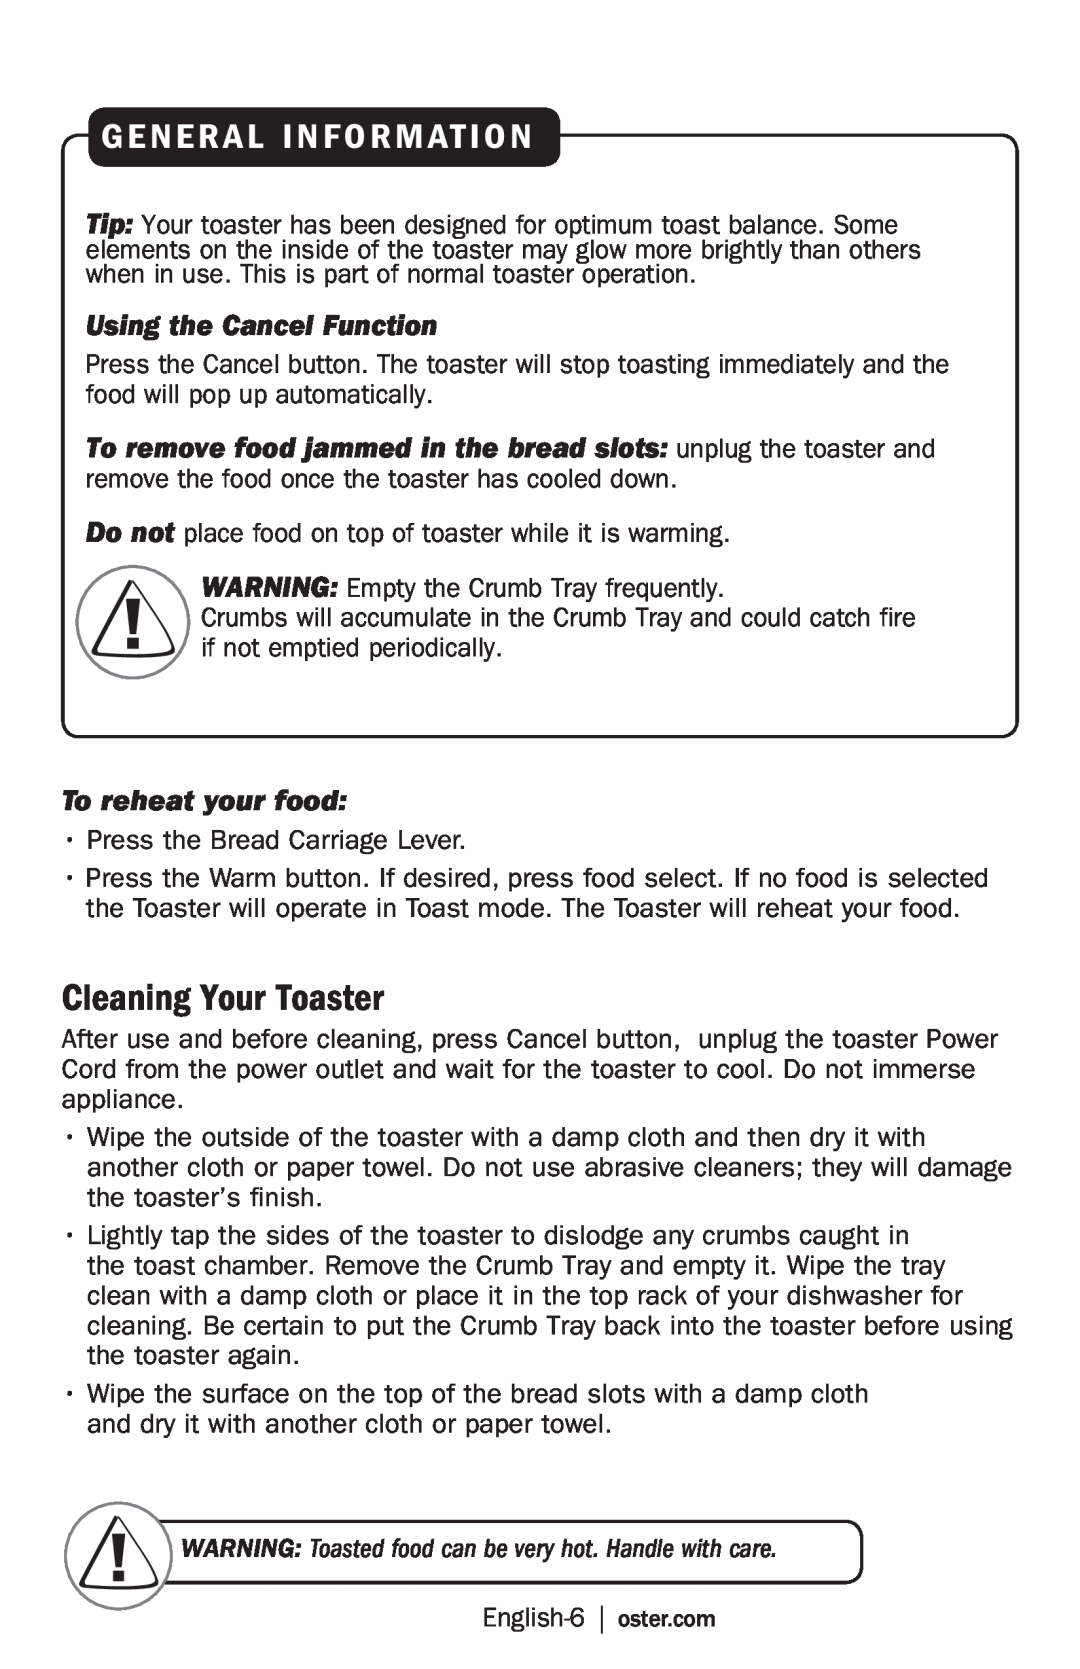 Oster TSSTRTS2S2 user manual Cleaning Your Toaster, General Information, Using the Cancel Function, To reheat your food 